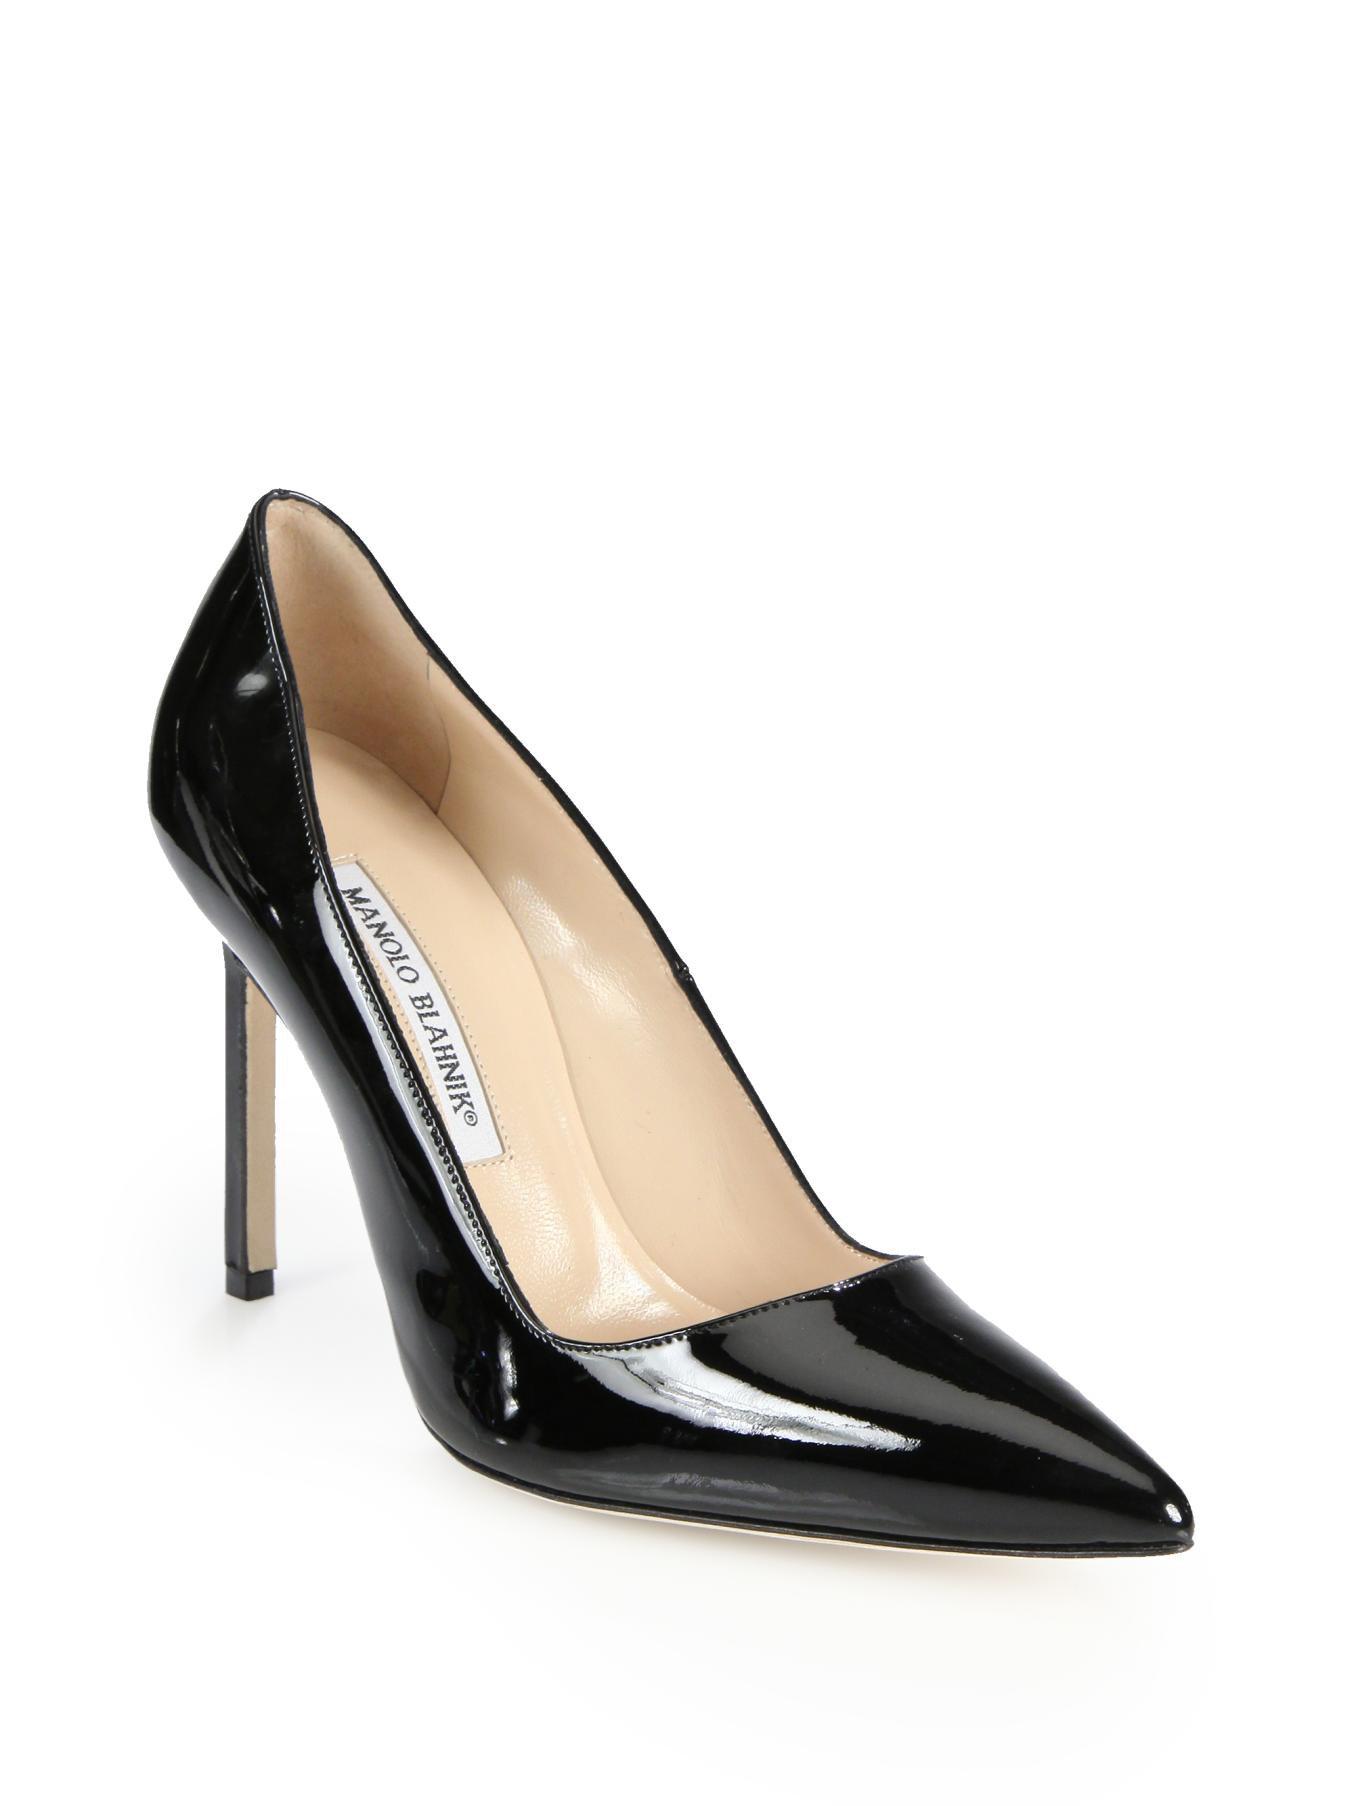 Lyst - Manolo Blahnik Bb 105 Patent Leather Point Toe Pumps in Black